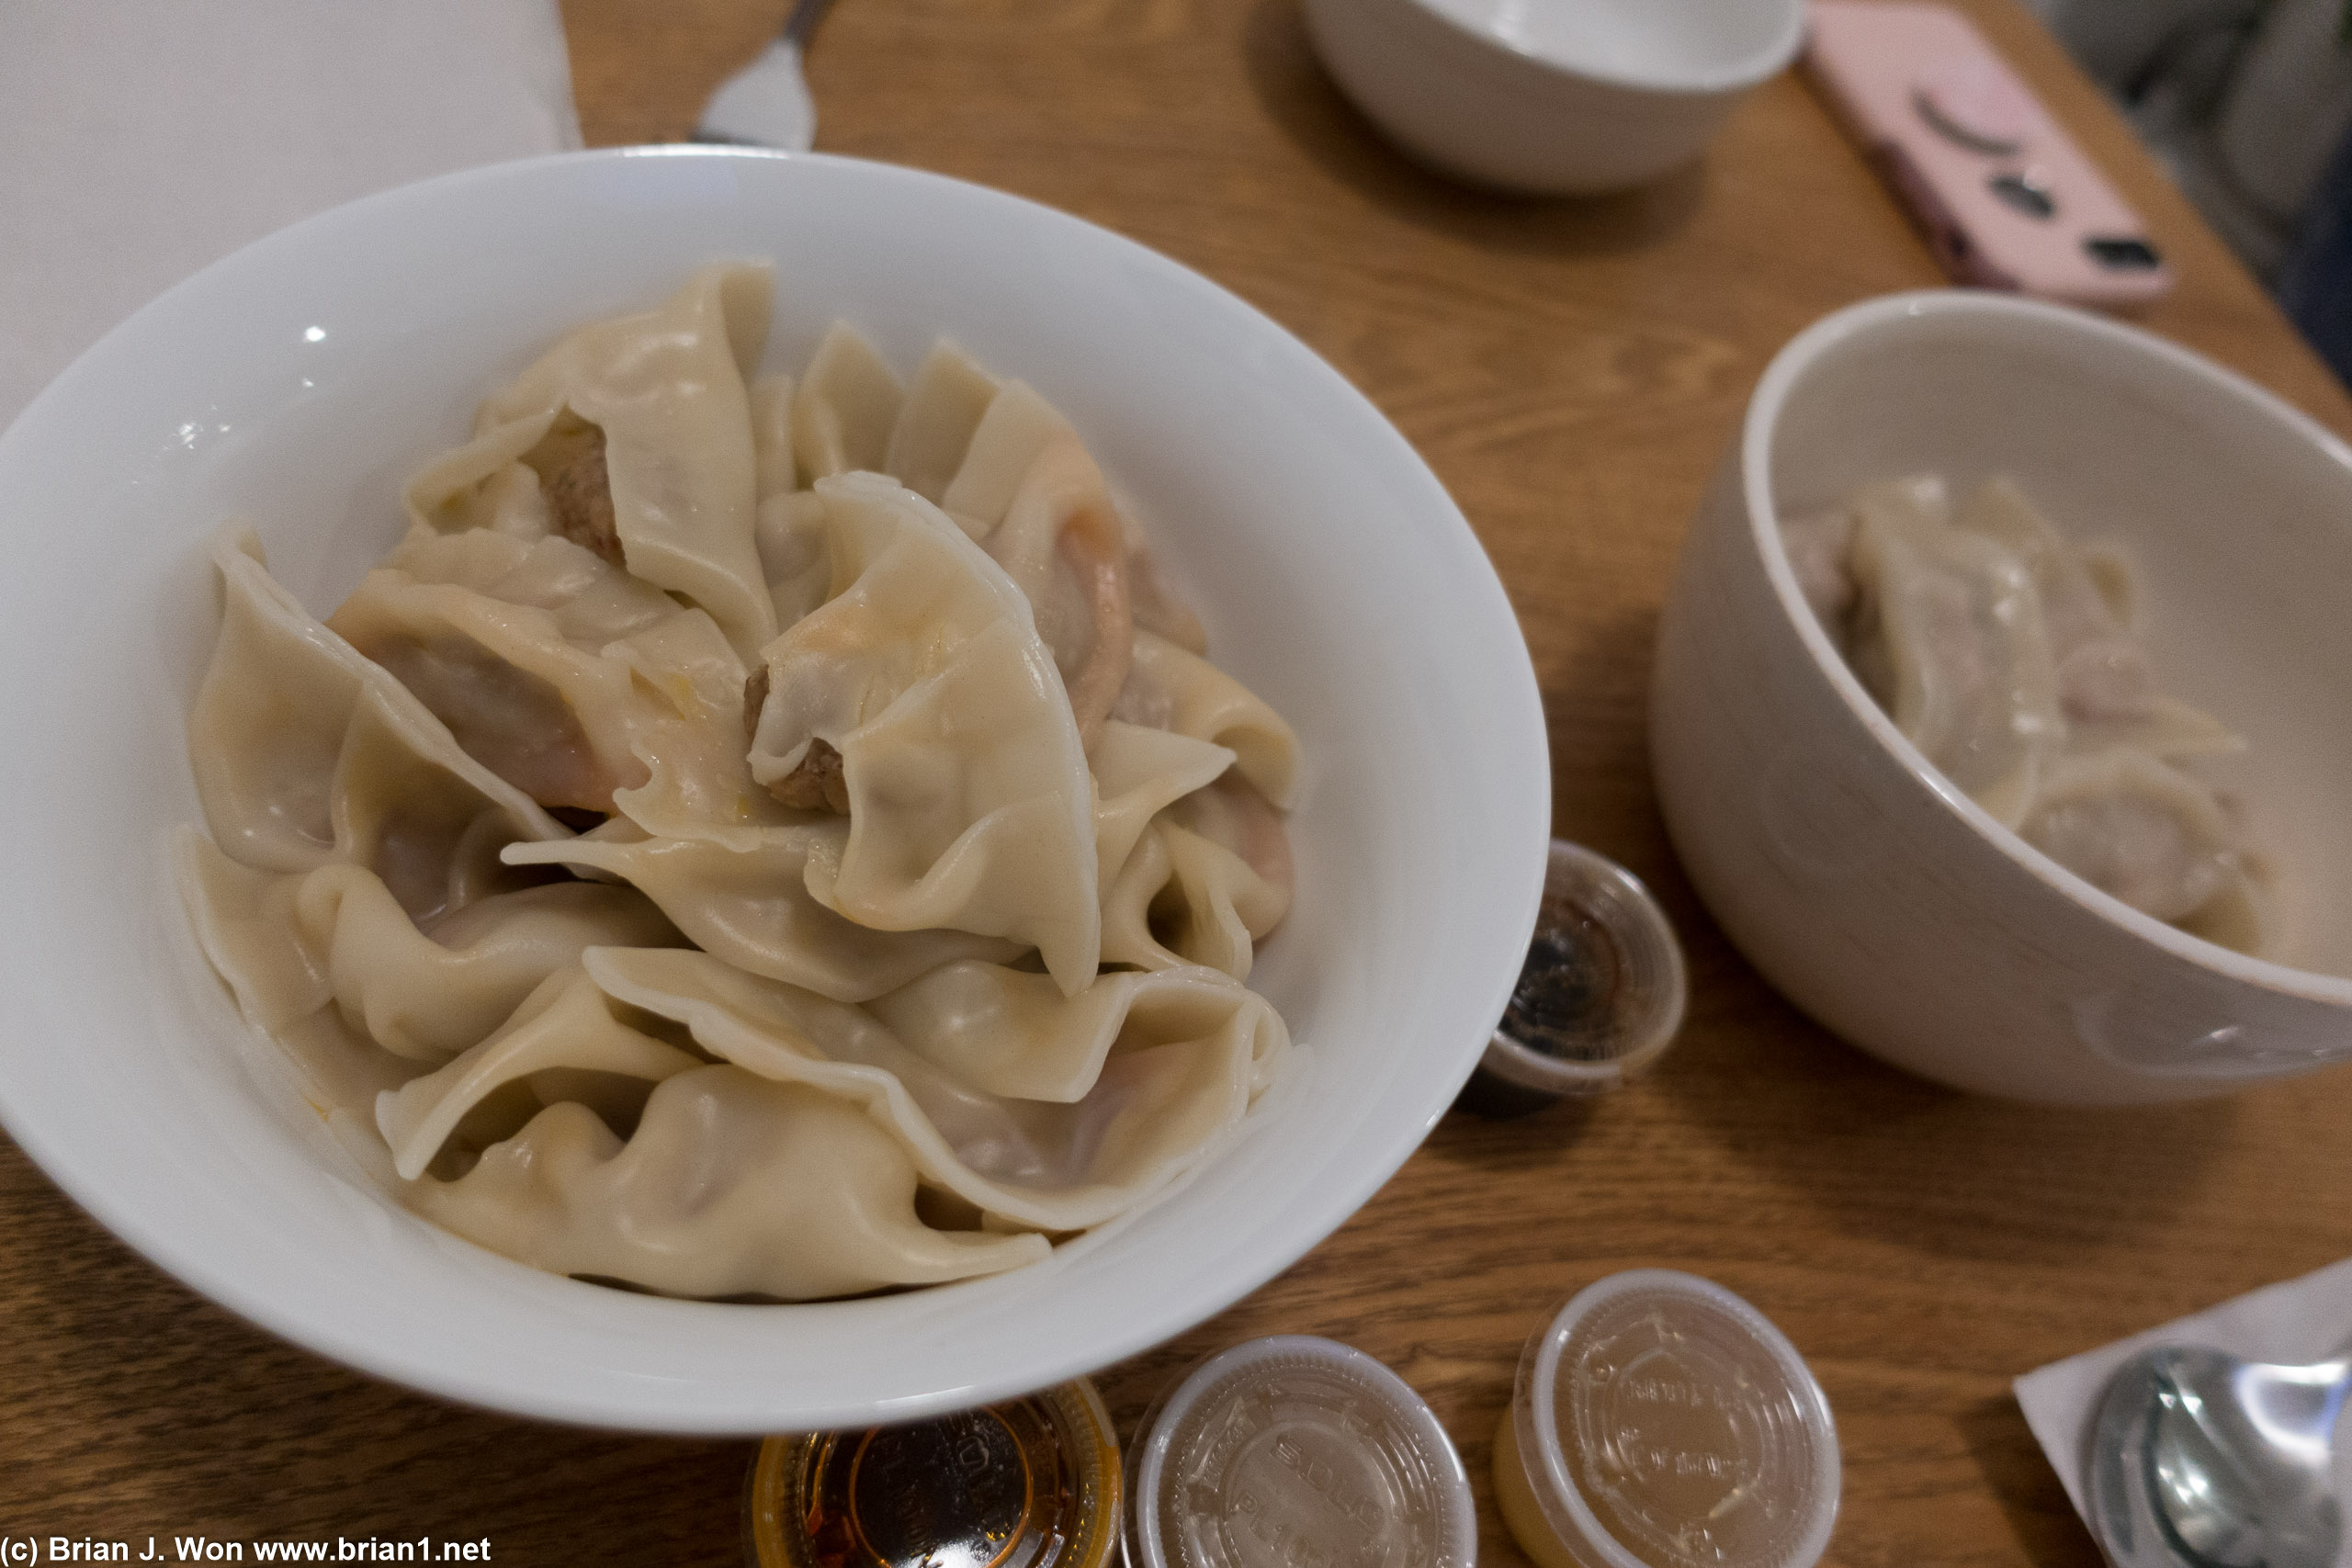 At right, Kurobota pork dumplings, with cabbage, egg, garlic, soy, sesame, and chive filling.